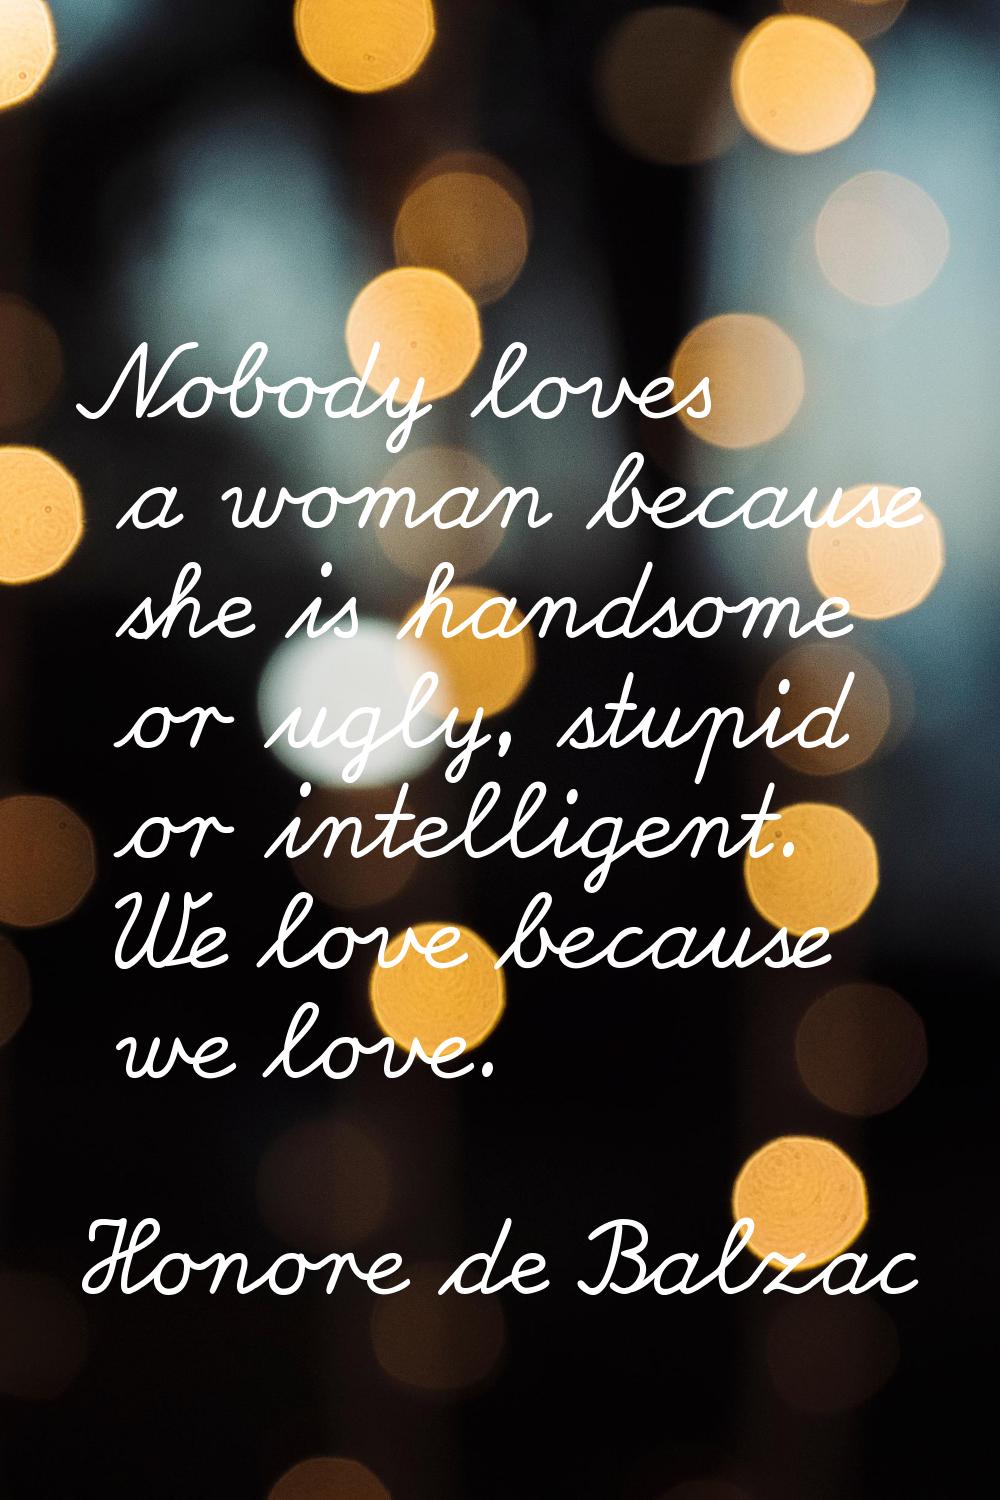 Nobody loves a woman because she is handsome or ugly, stupid or intelligent. We love because we lov